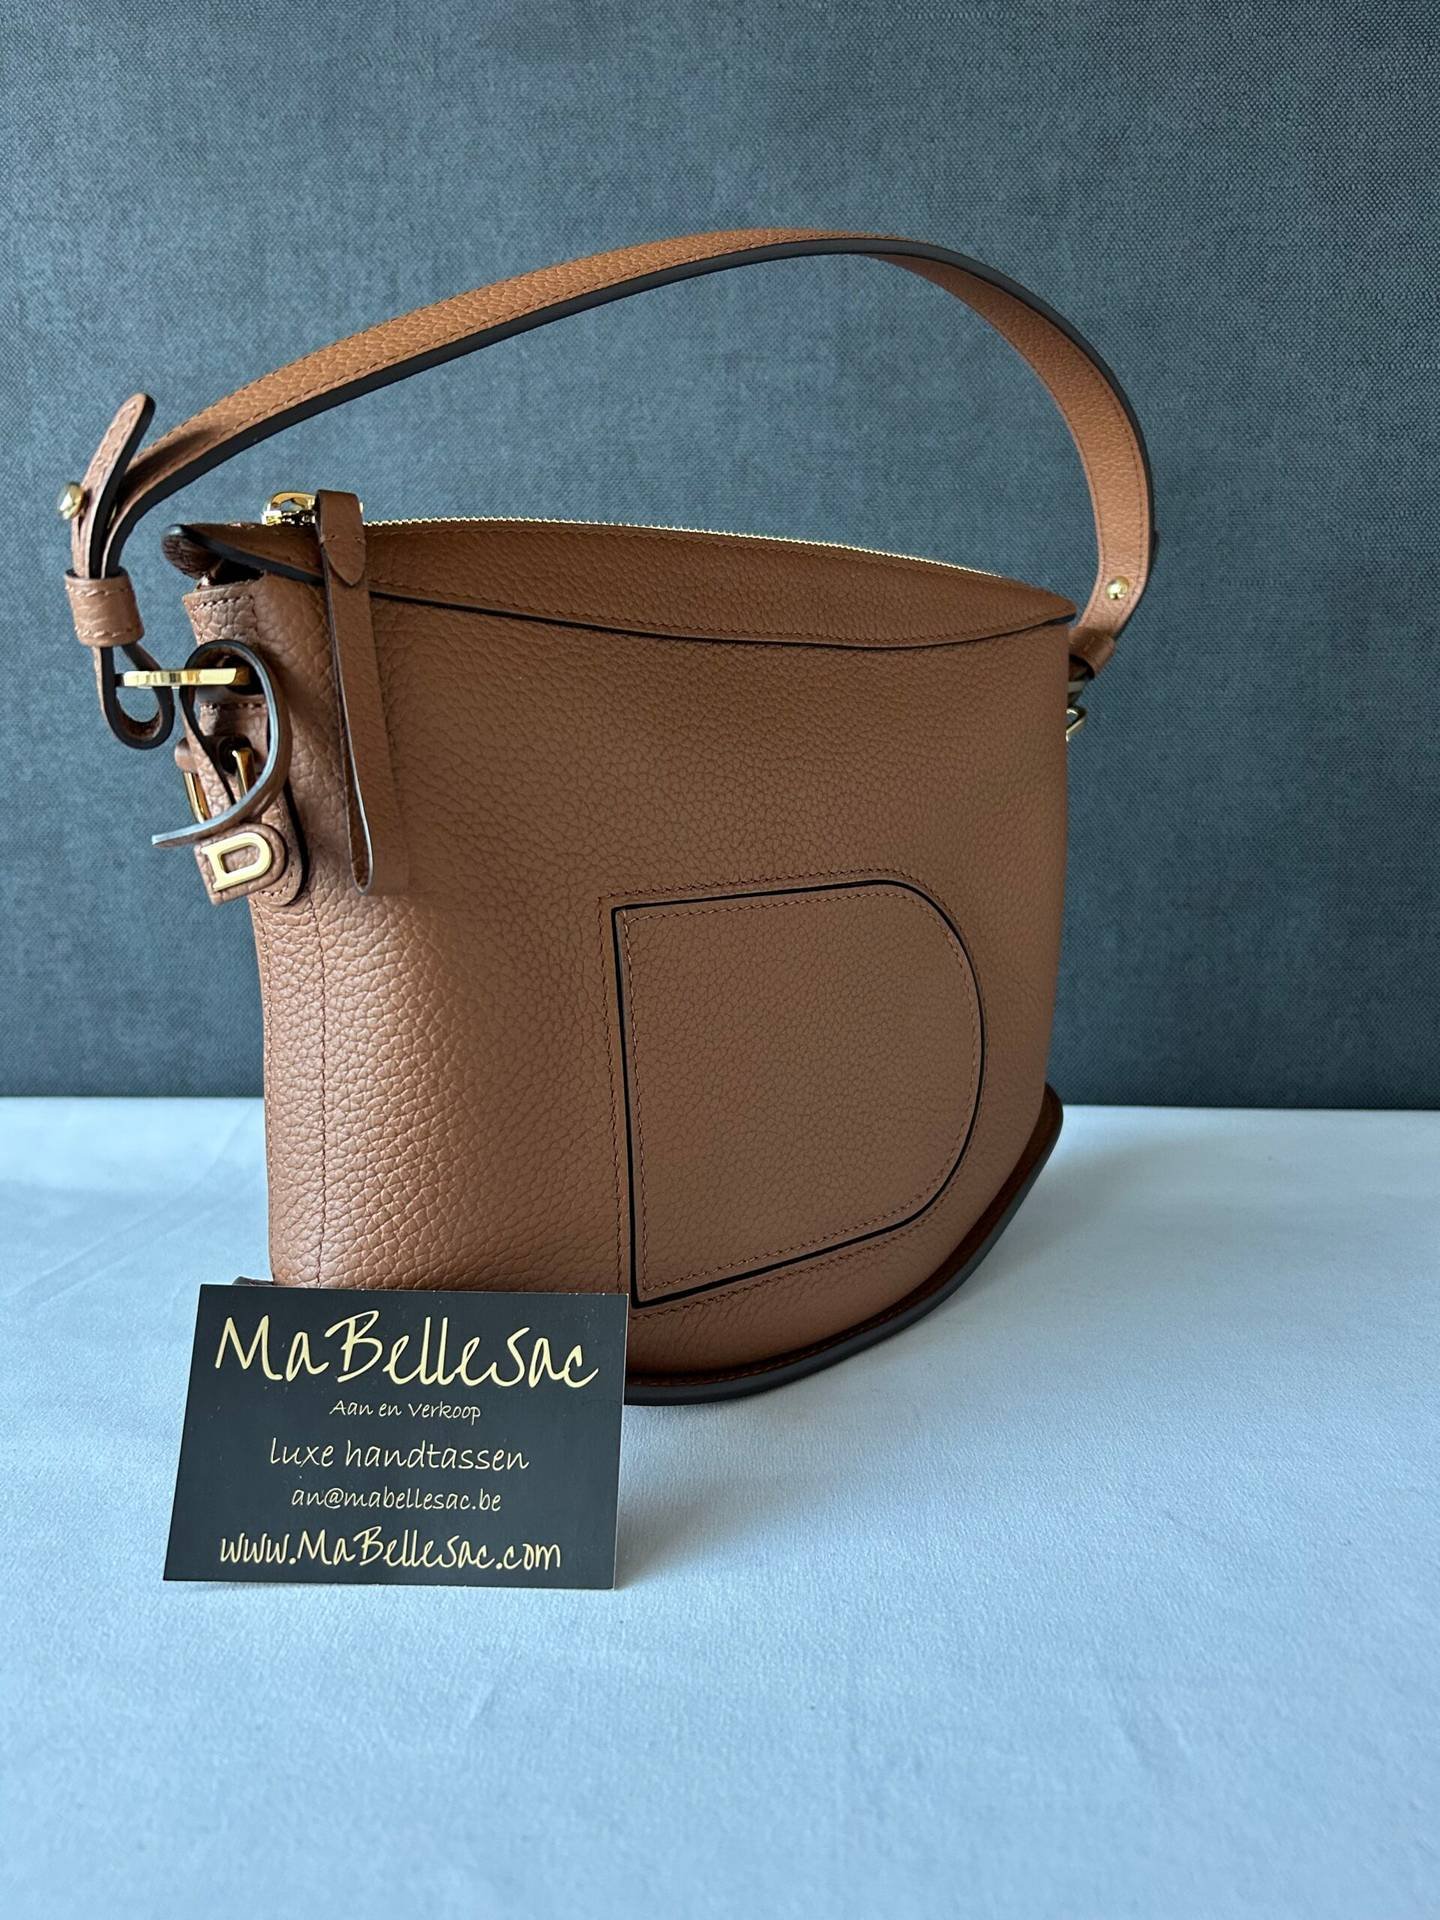 Small Delvaux Pin in cognac colour with white stitching